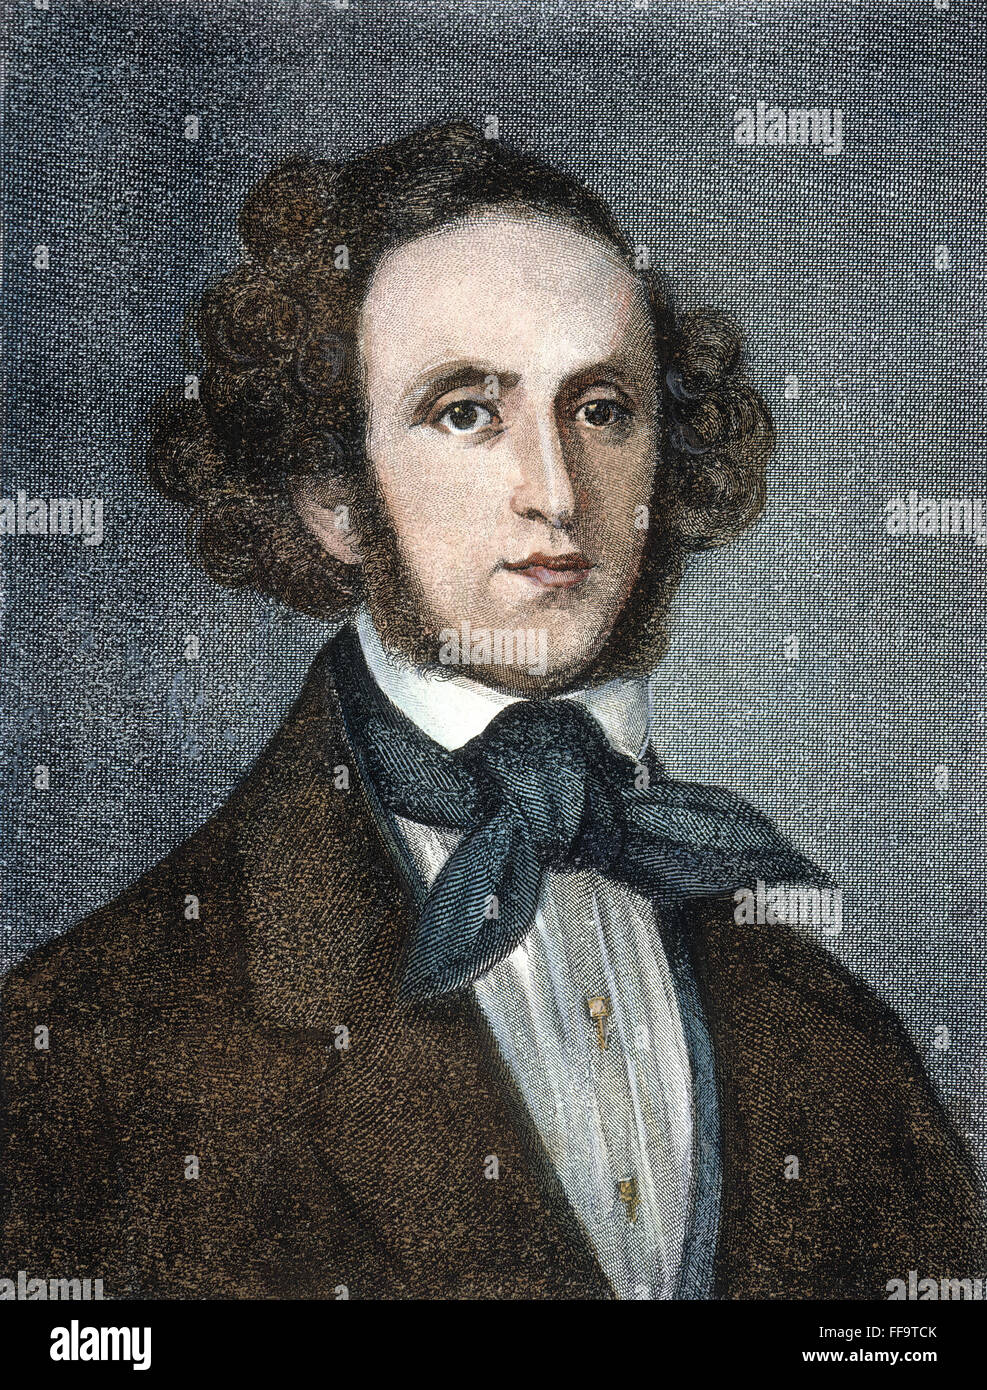 FELIX MENDELSSOHN /n(1809-1847). German composer: steel engraving, 19th century, after a painting by E. Magnus. Stock Photo